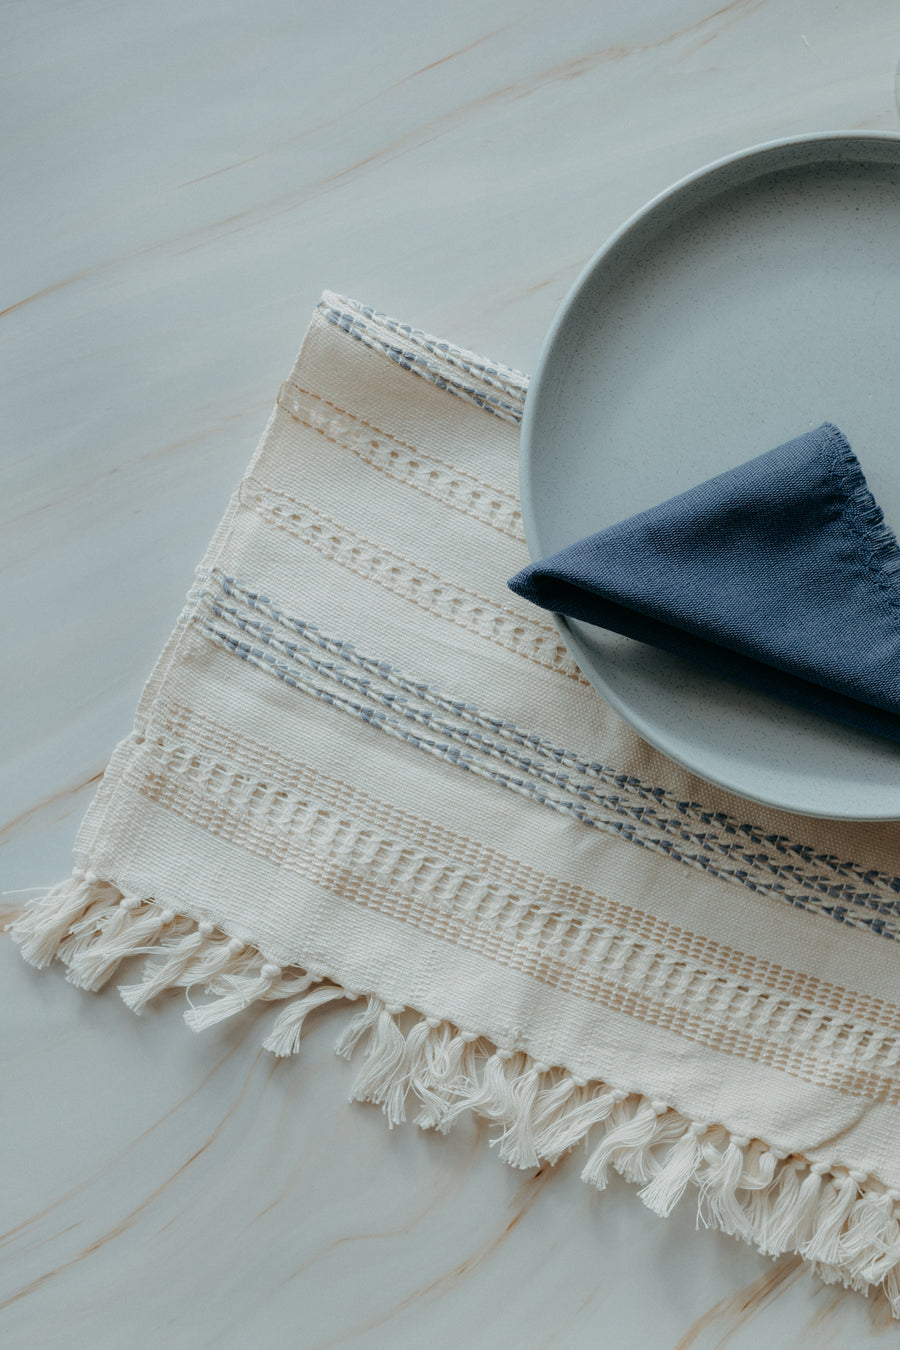 Beige and light blue placemat and blue napkin